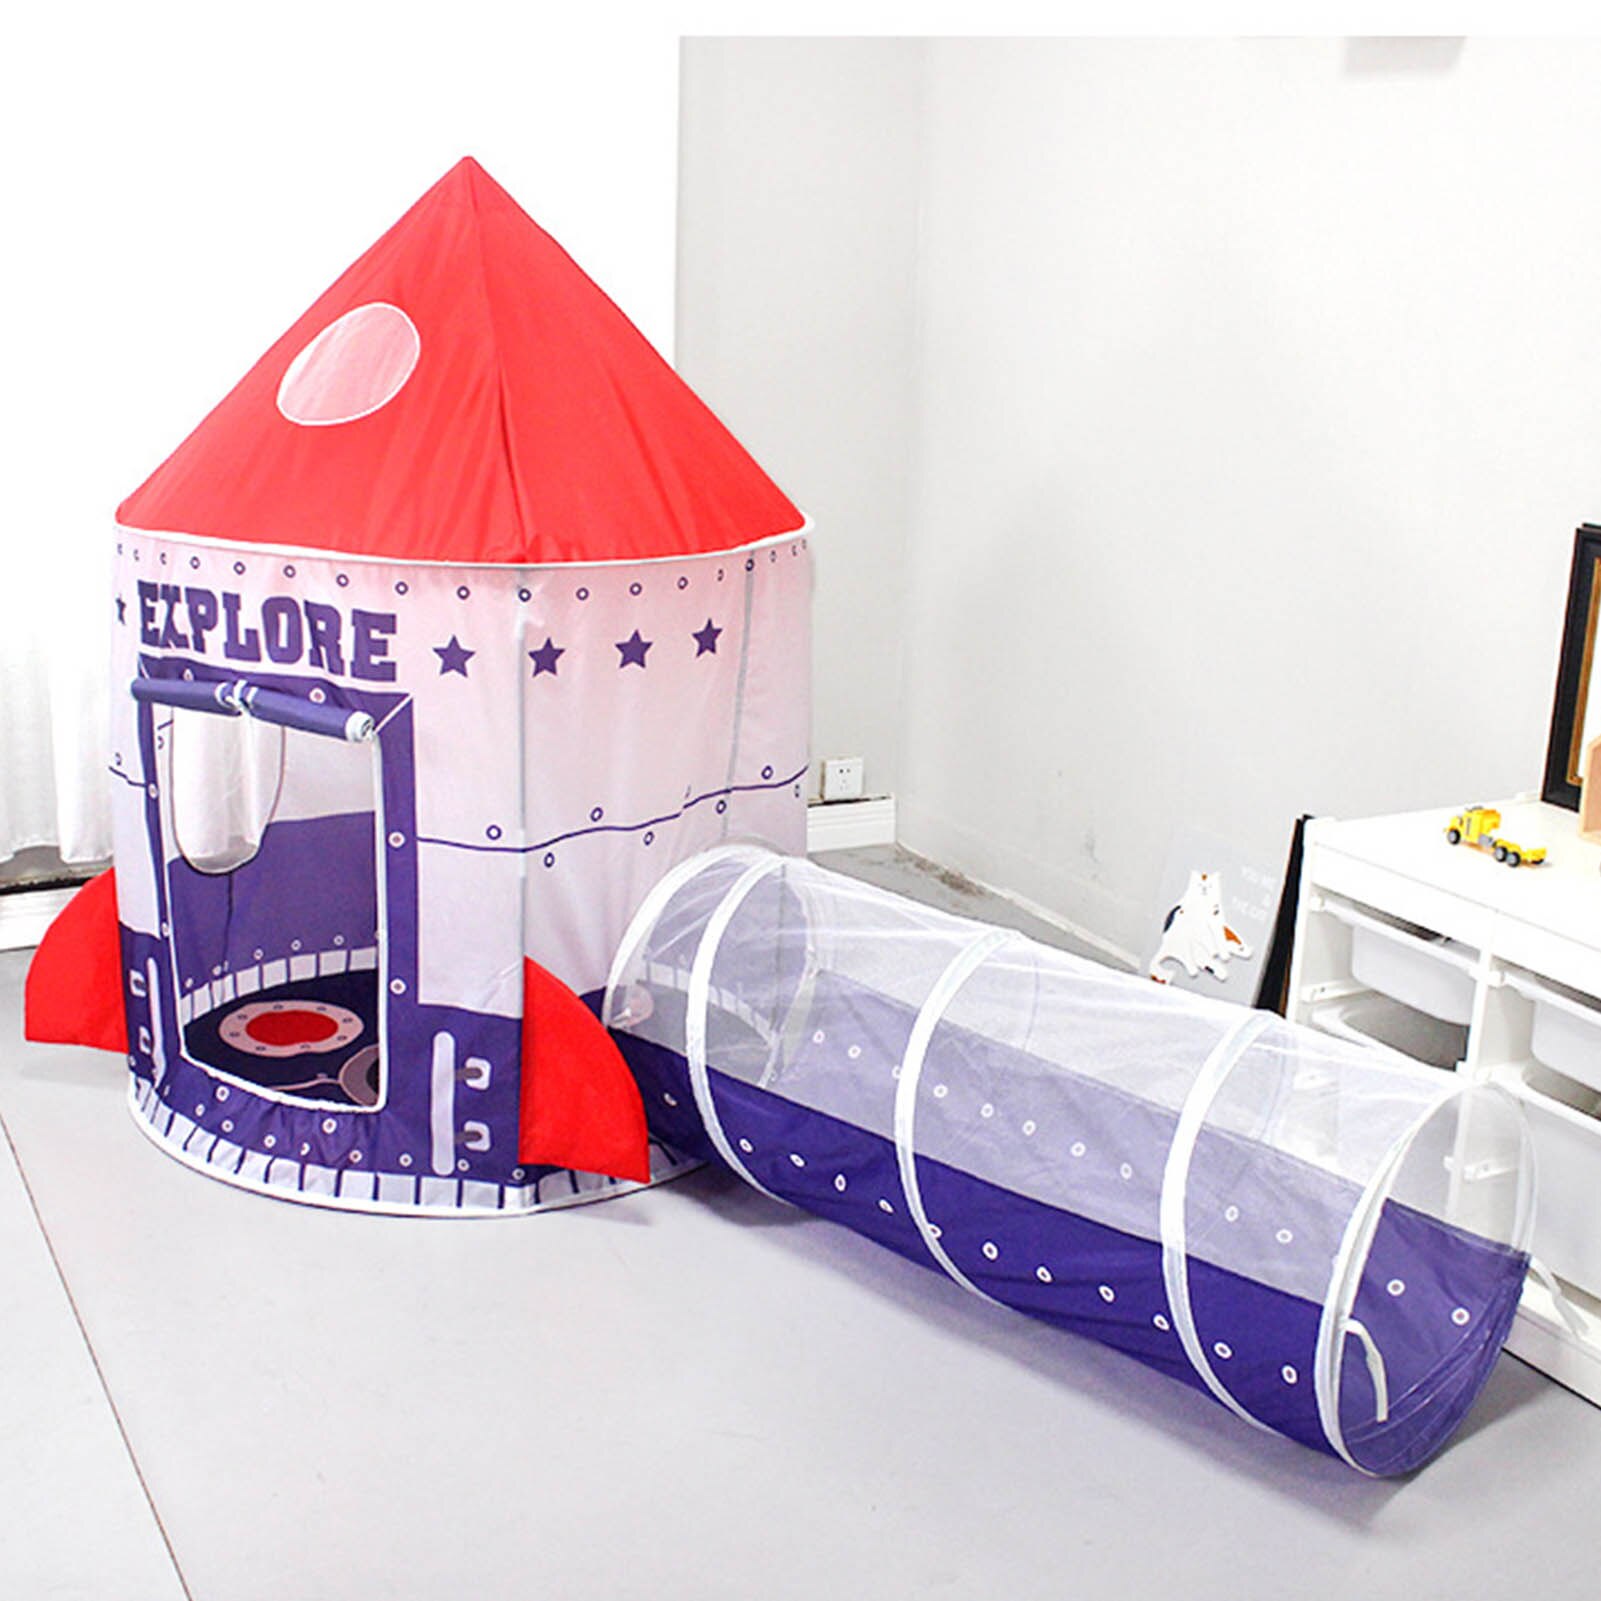 Portable-3-In-1-Baby-Tent-Kid-Crawling-Tunnel-Play-Tent-House-Ball-Pit-Pool-Tent-1